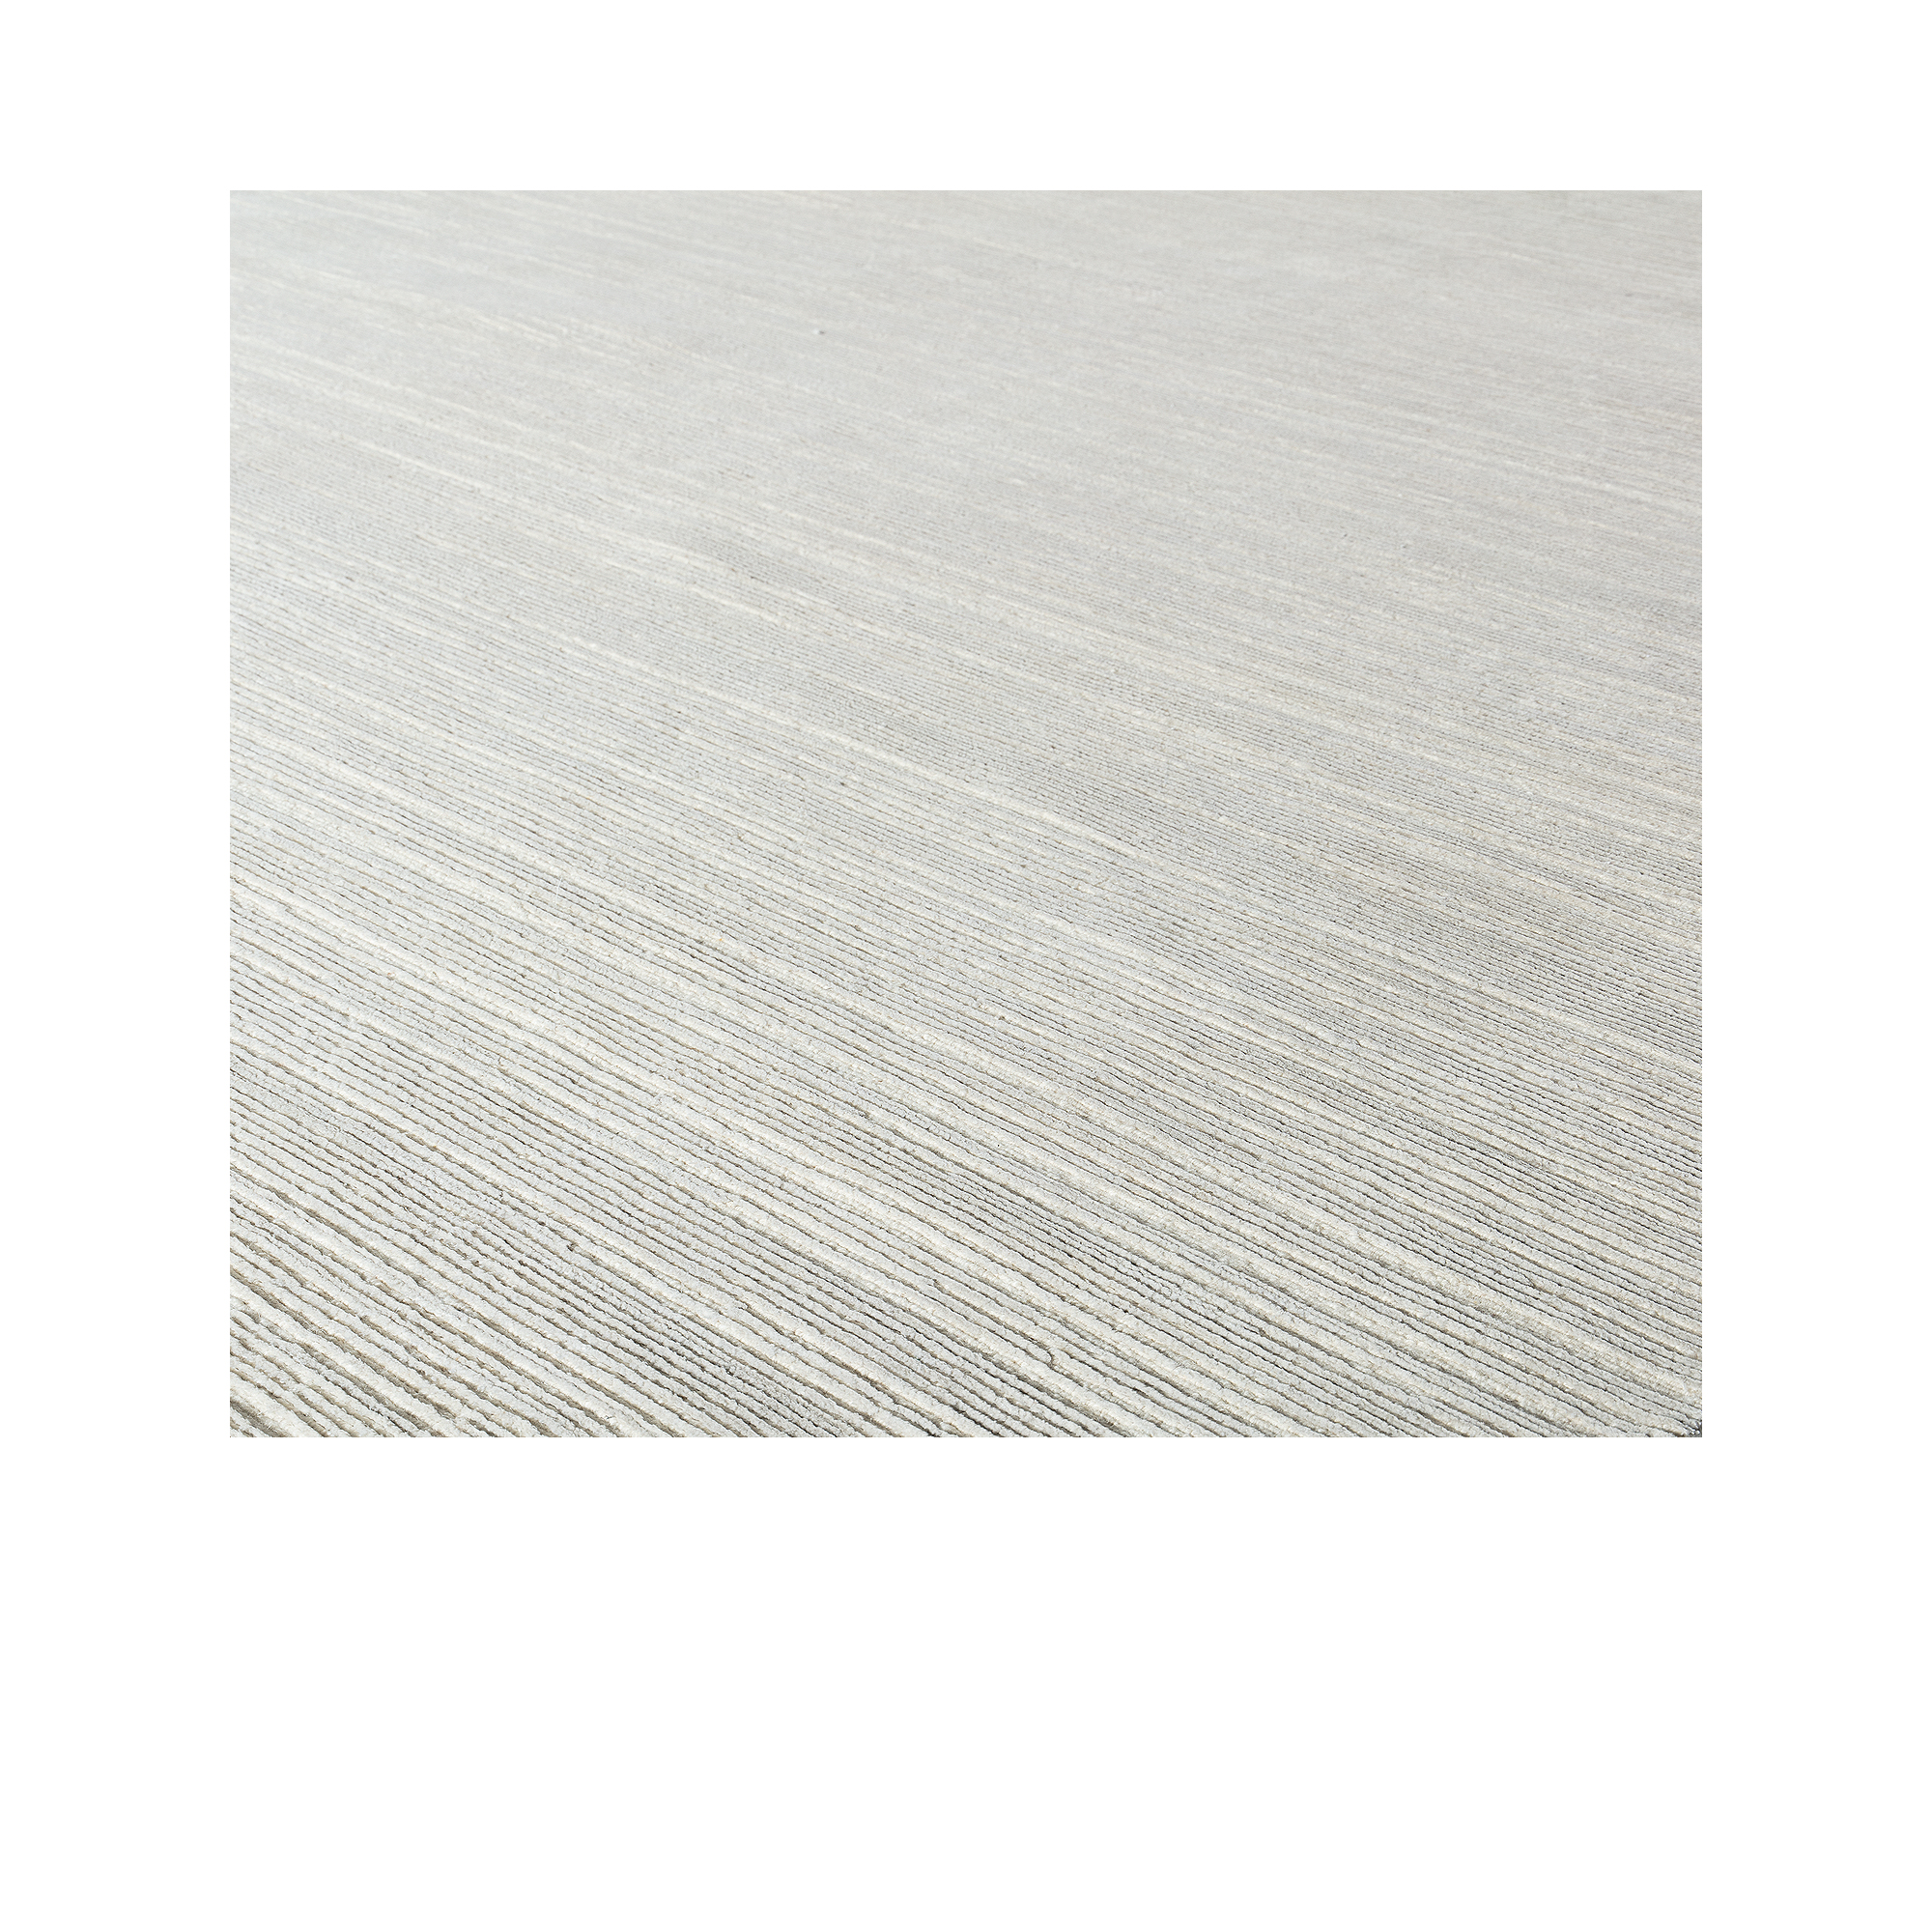 Our Staggered rug is hand-knotted made of wool and pure silk.